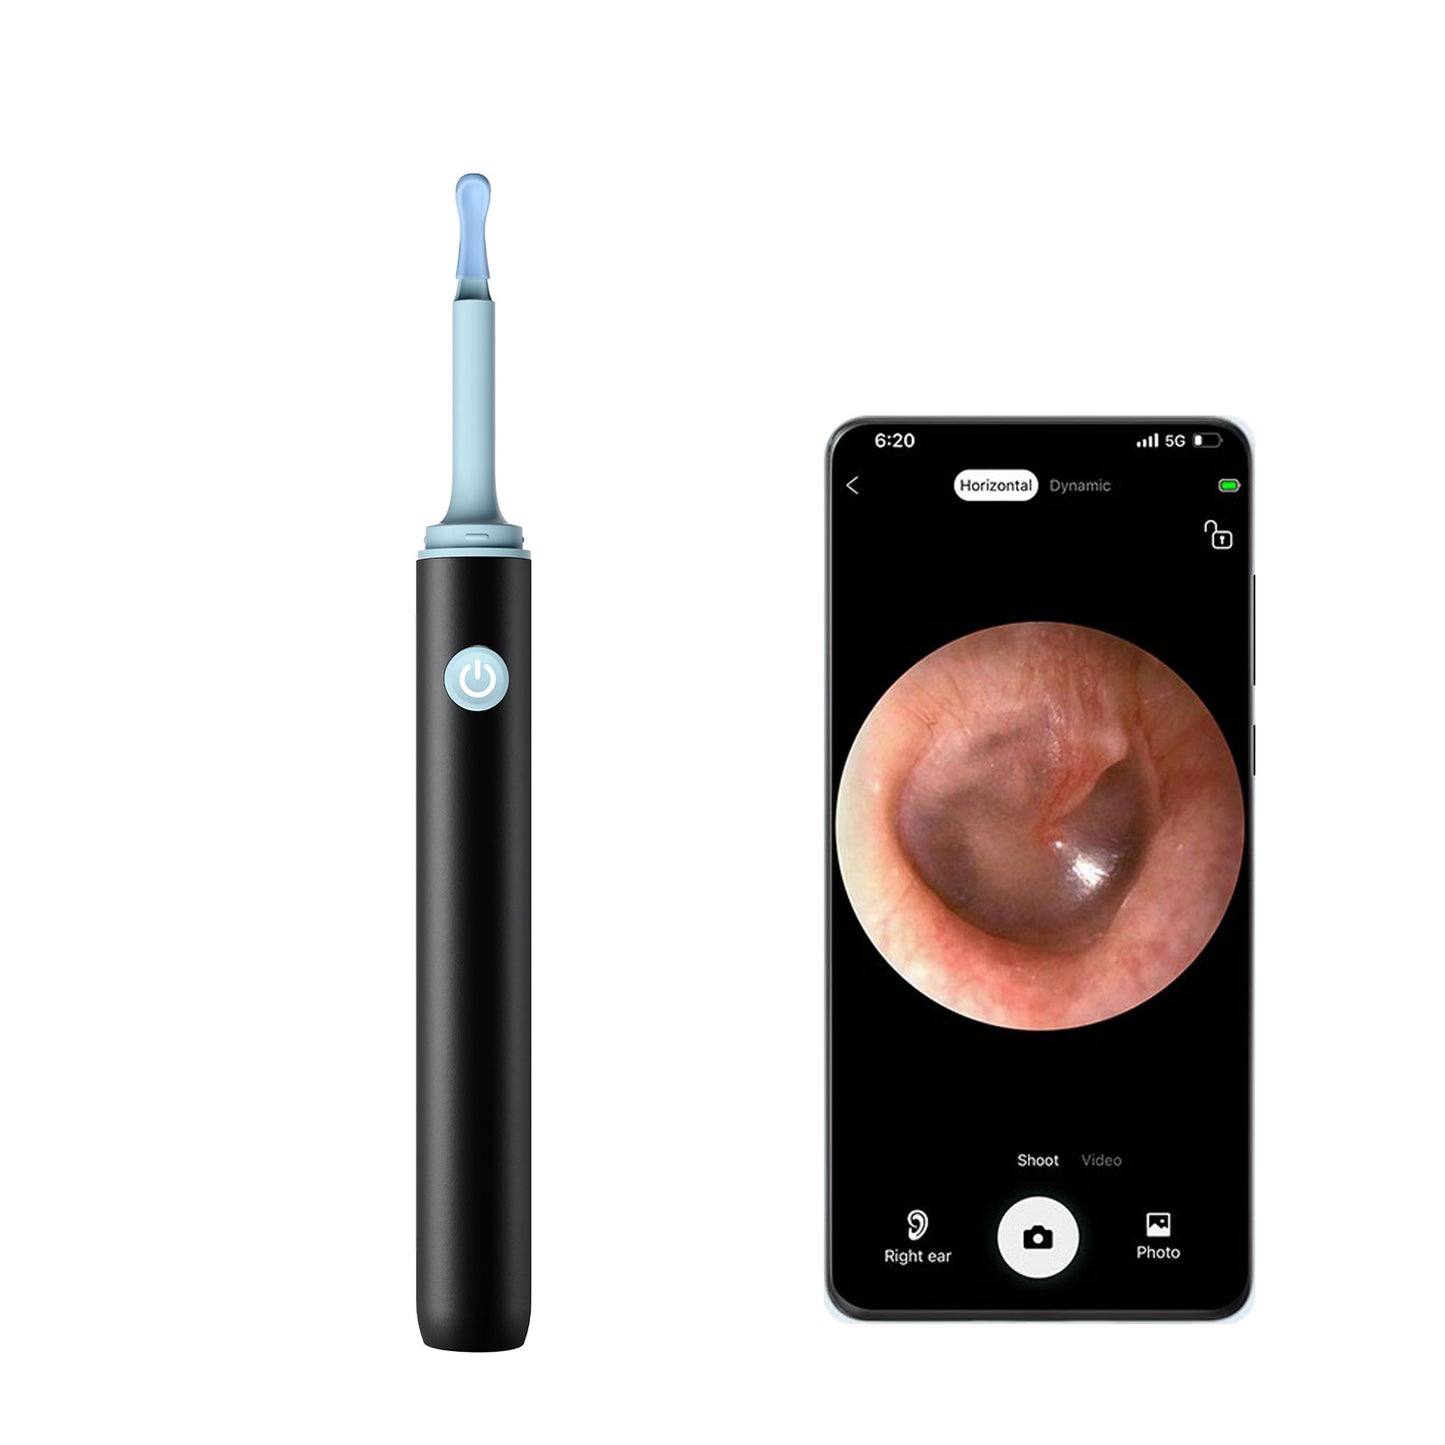 Find B - Smart Visual Ear Wax Removal with Camera